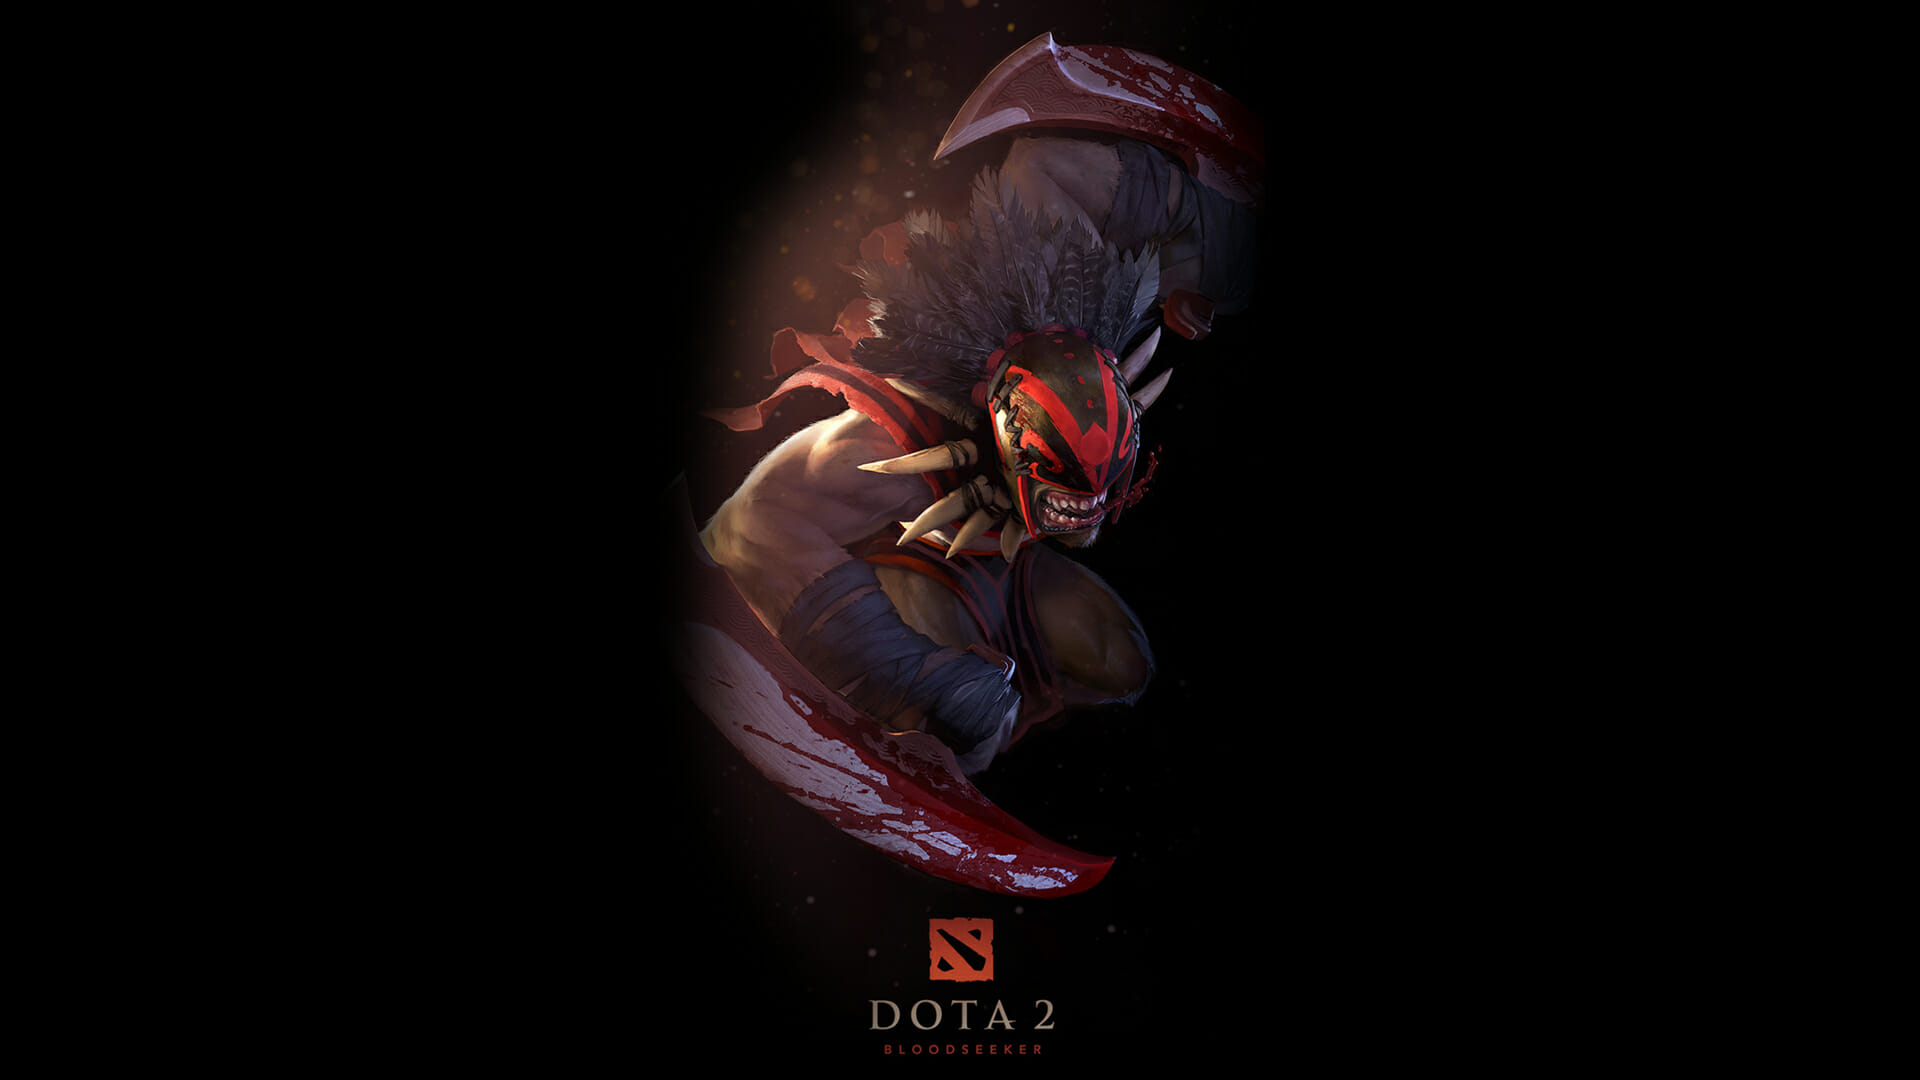 2 Easy Way: How To Get Dota2 Bloodseeker The Gallows Understudy Set?